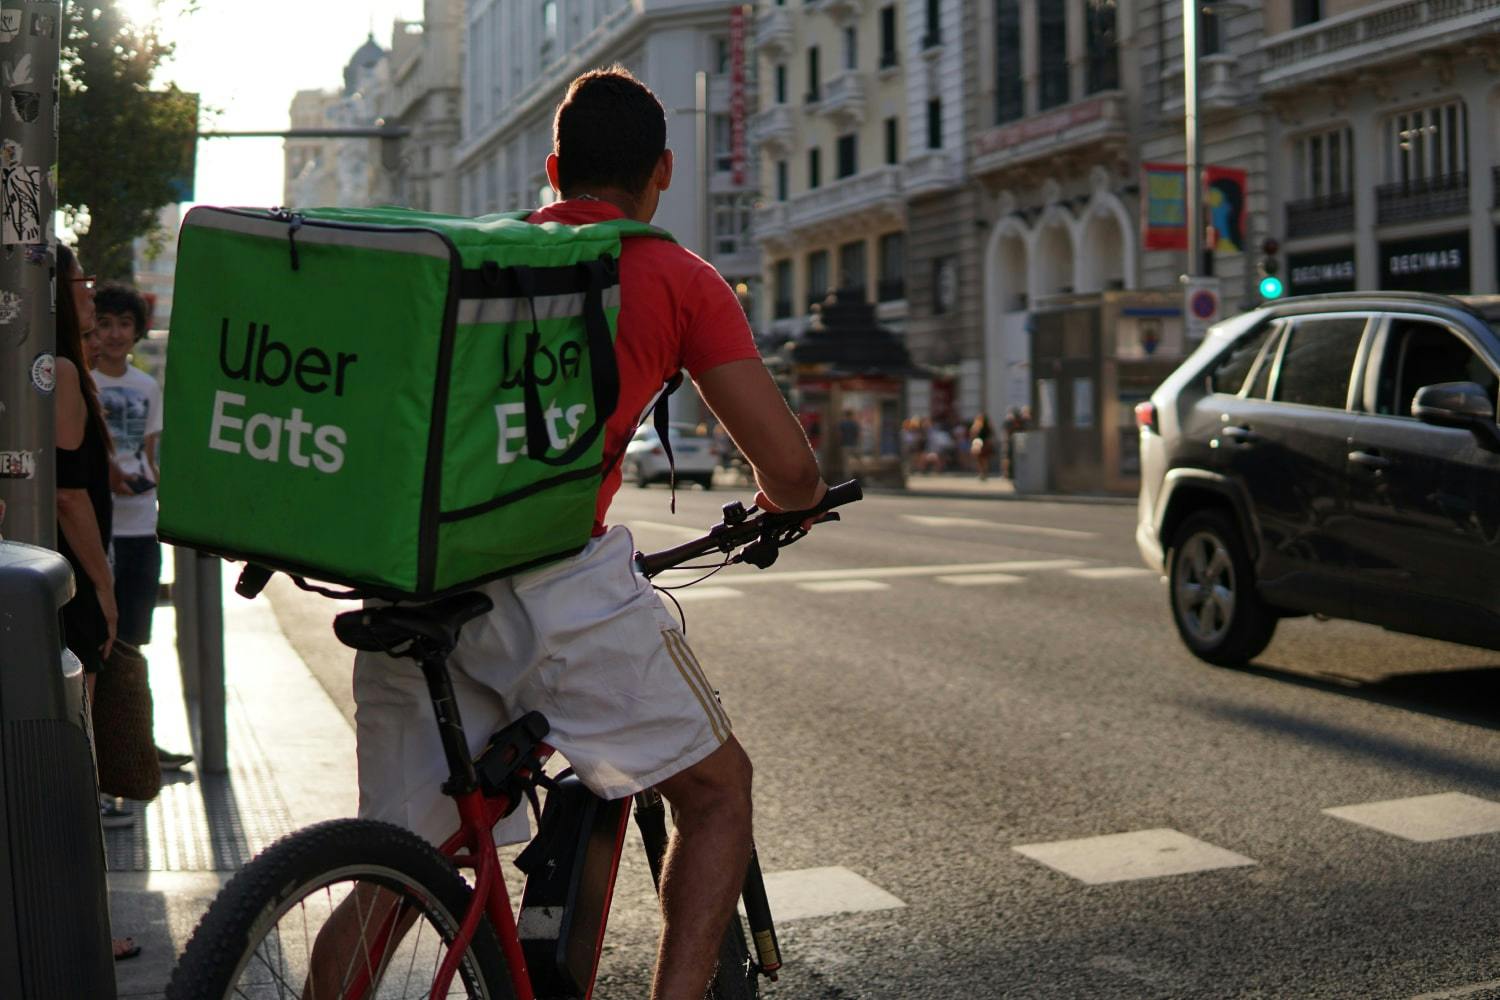 Image of a Uber Eats delivery rider on a bicycle